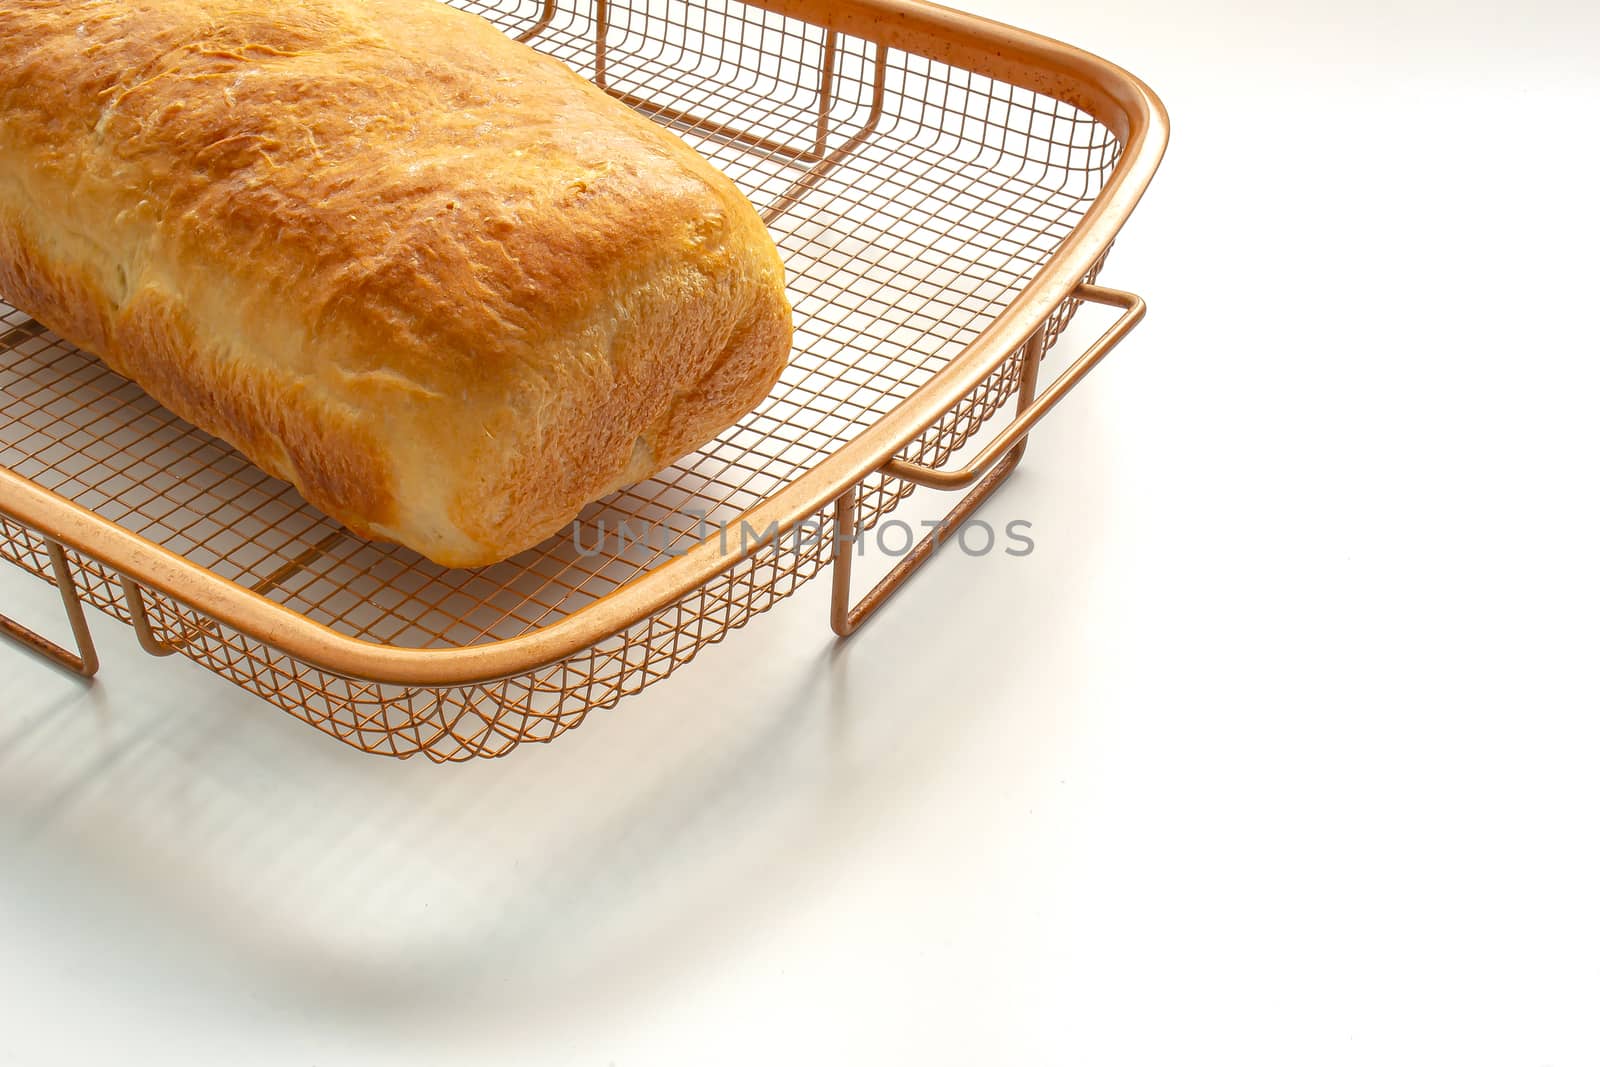 An isolated homemade white bread on a cooling rack on white table by oasisamuel